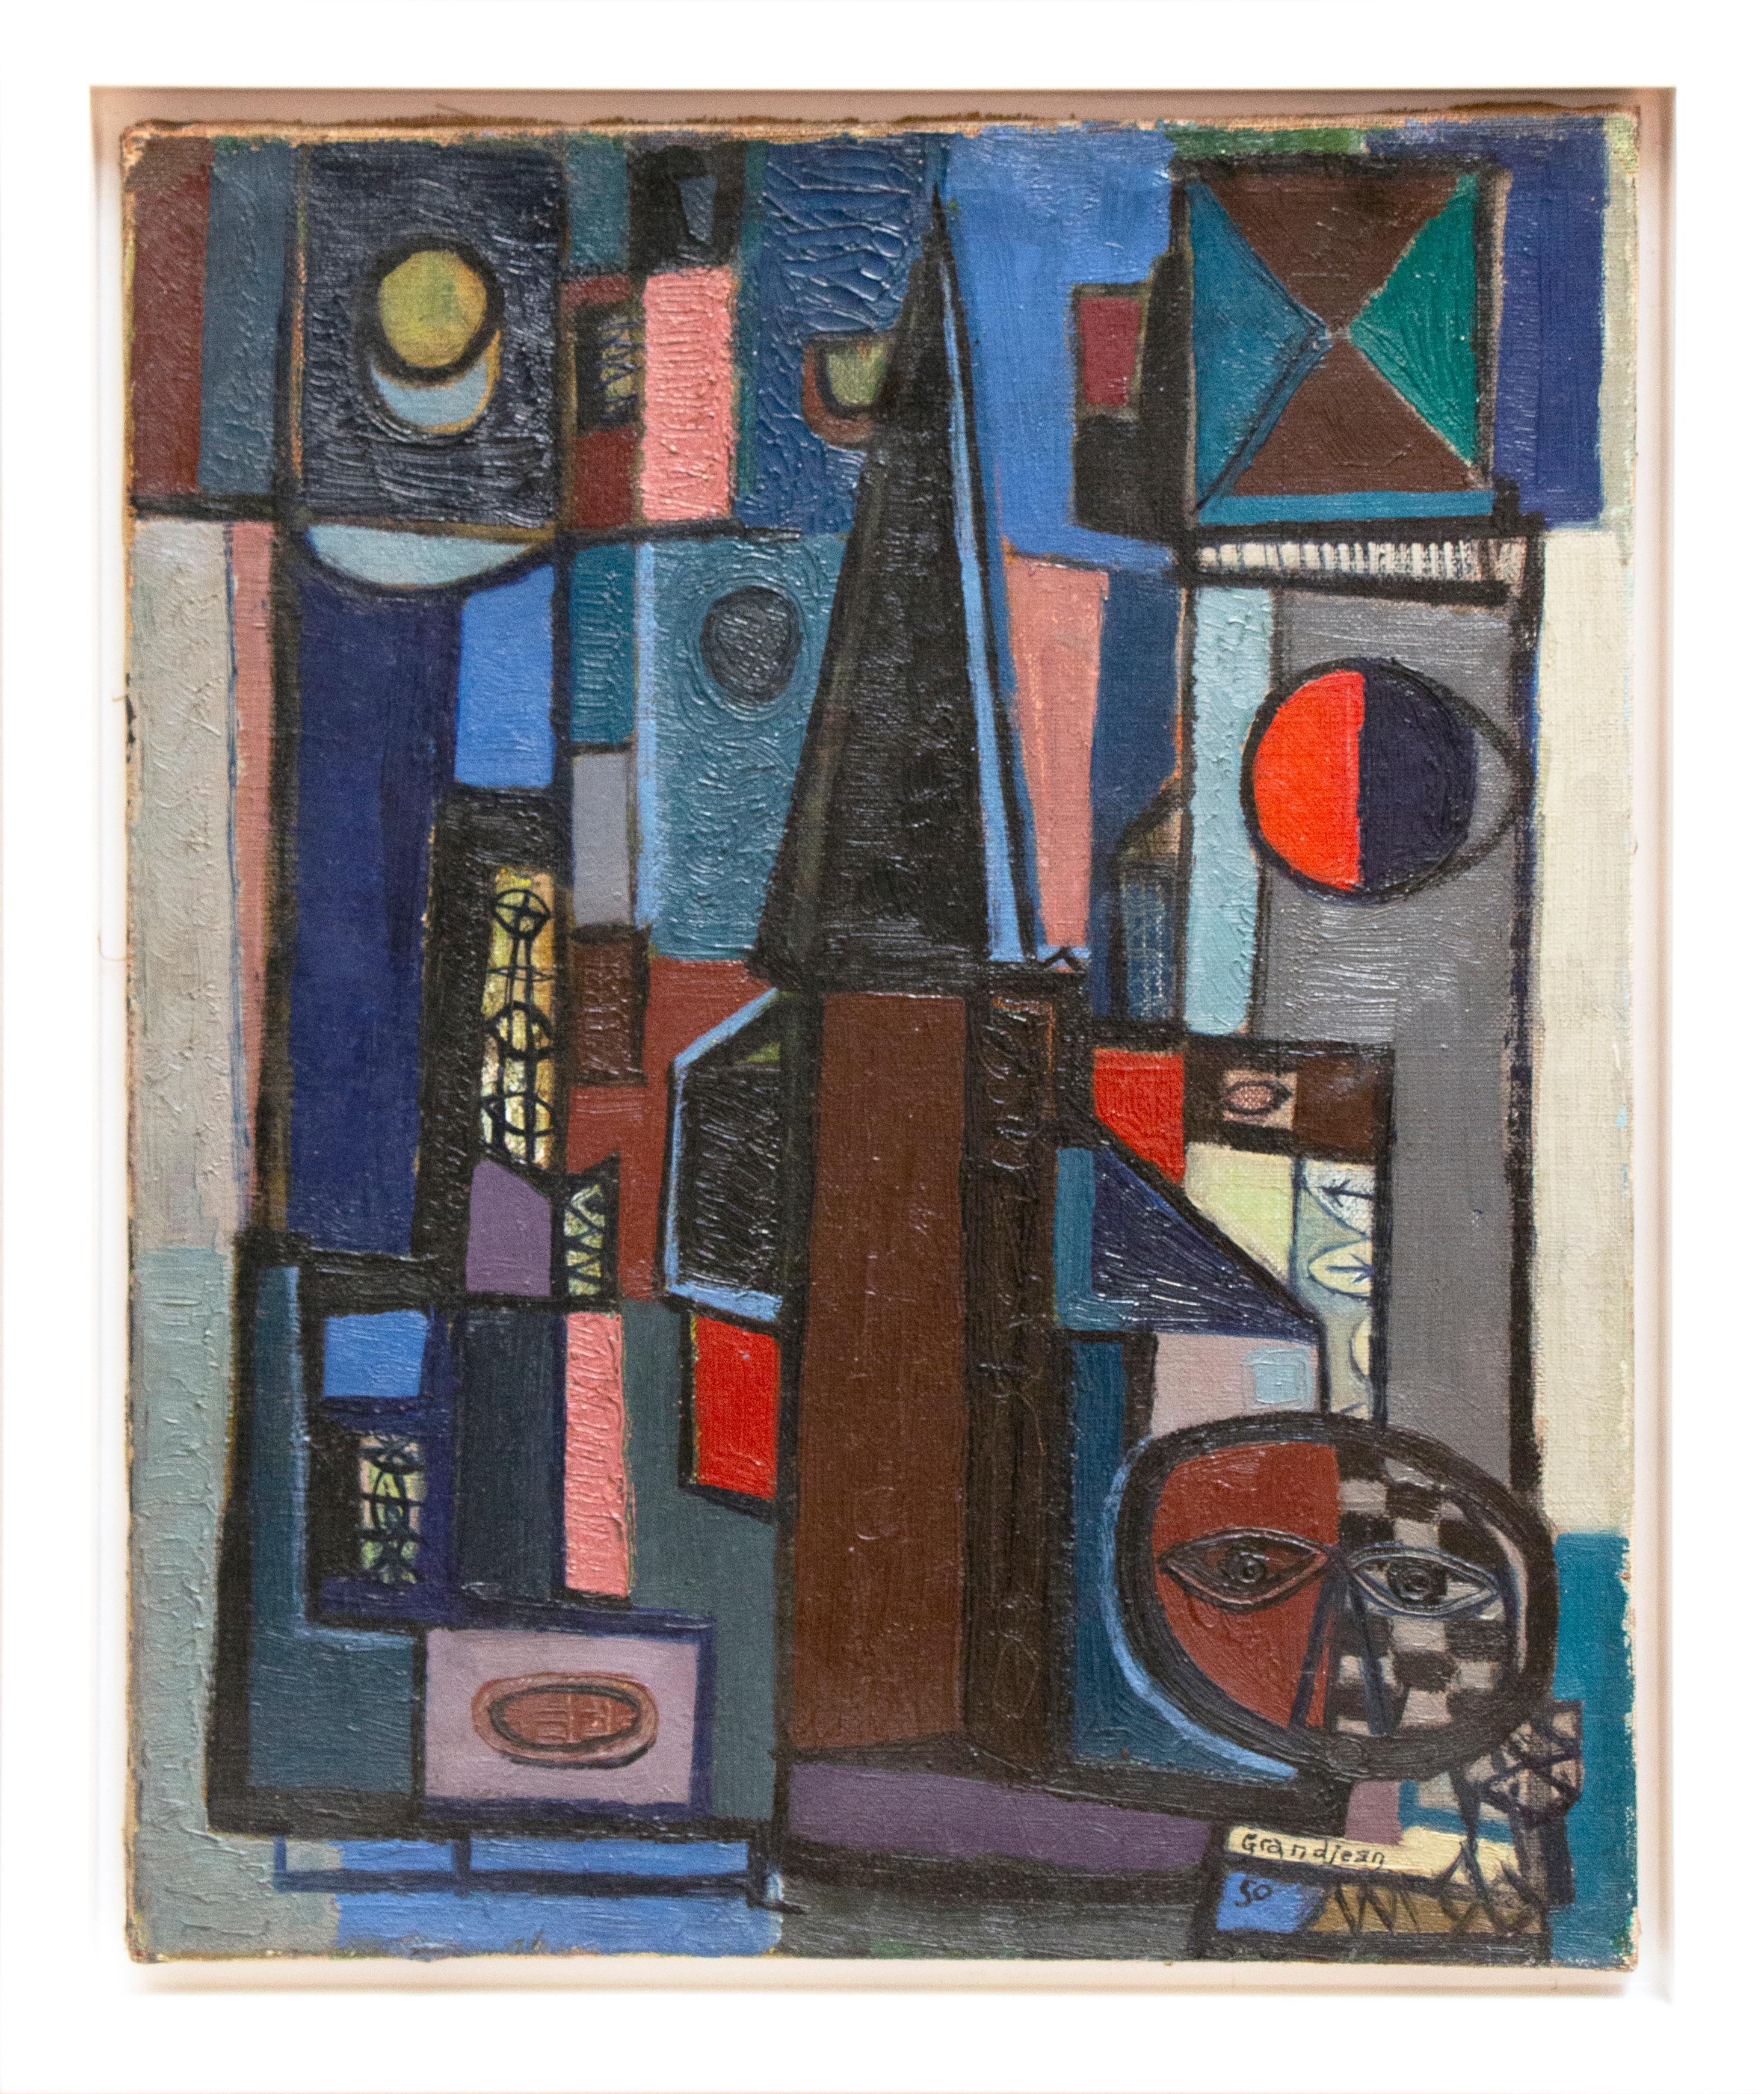 This is an abstracted city-scape in a post-war style by French artist Raymond Grandjean.  It has many shades of blue and red along with gray and earth tones. This work is indicative of Grandjean's style of geometric motifs and connected triangles. 